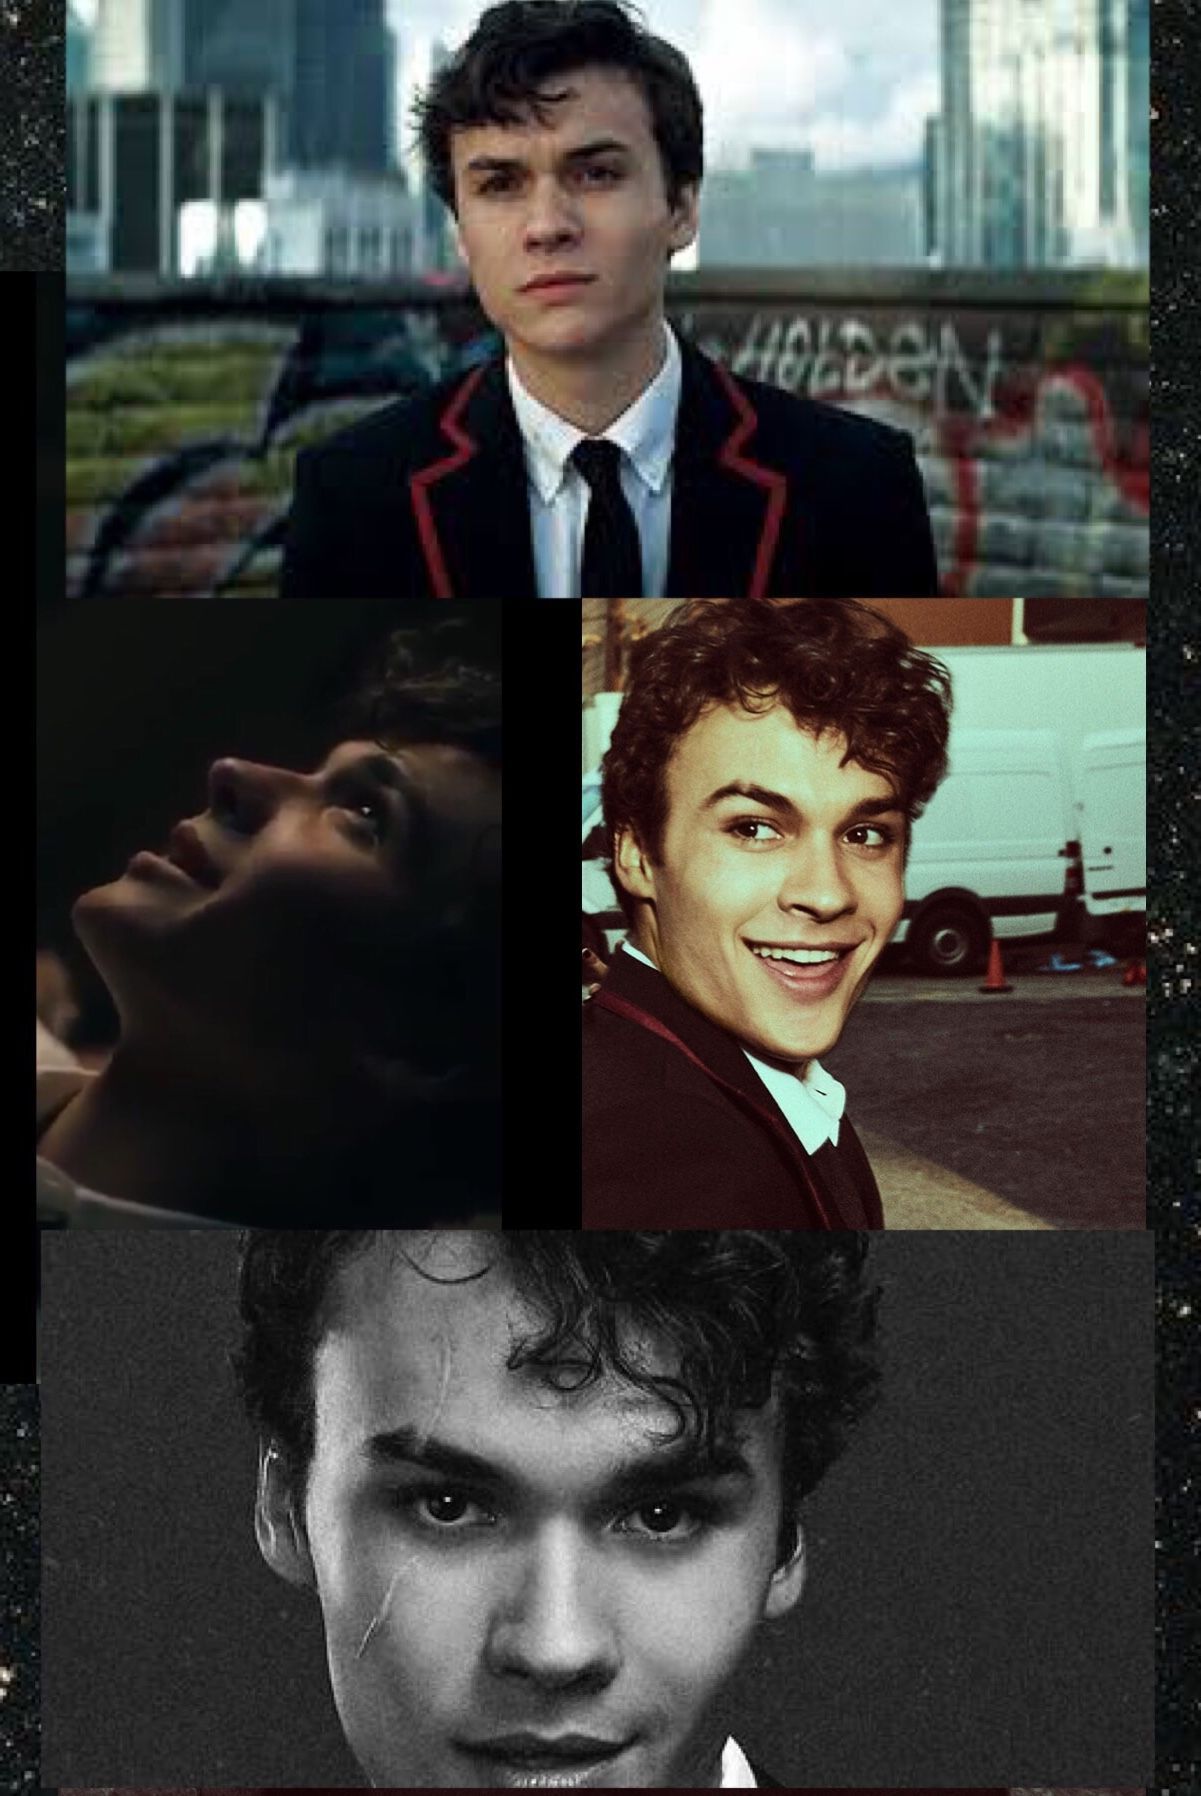 MINEBenjamin Wadsworth!he's literally a GOD omgggg Marcus from Deadly Class!. Character actor, Wadsworth, Attractive people